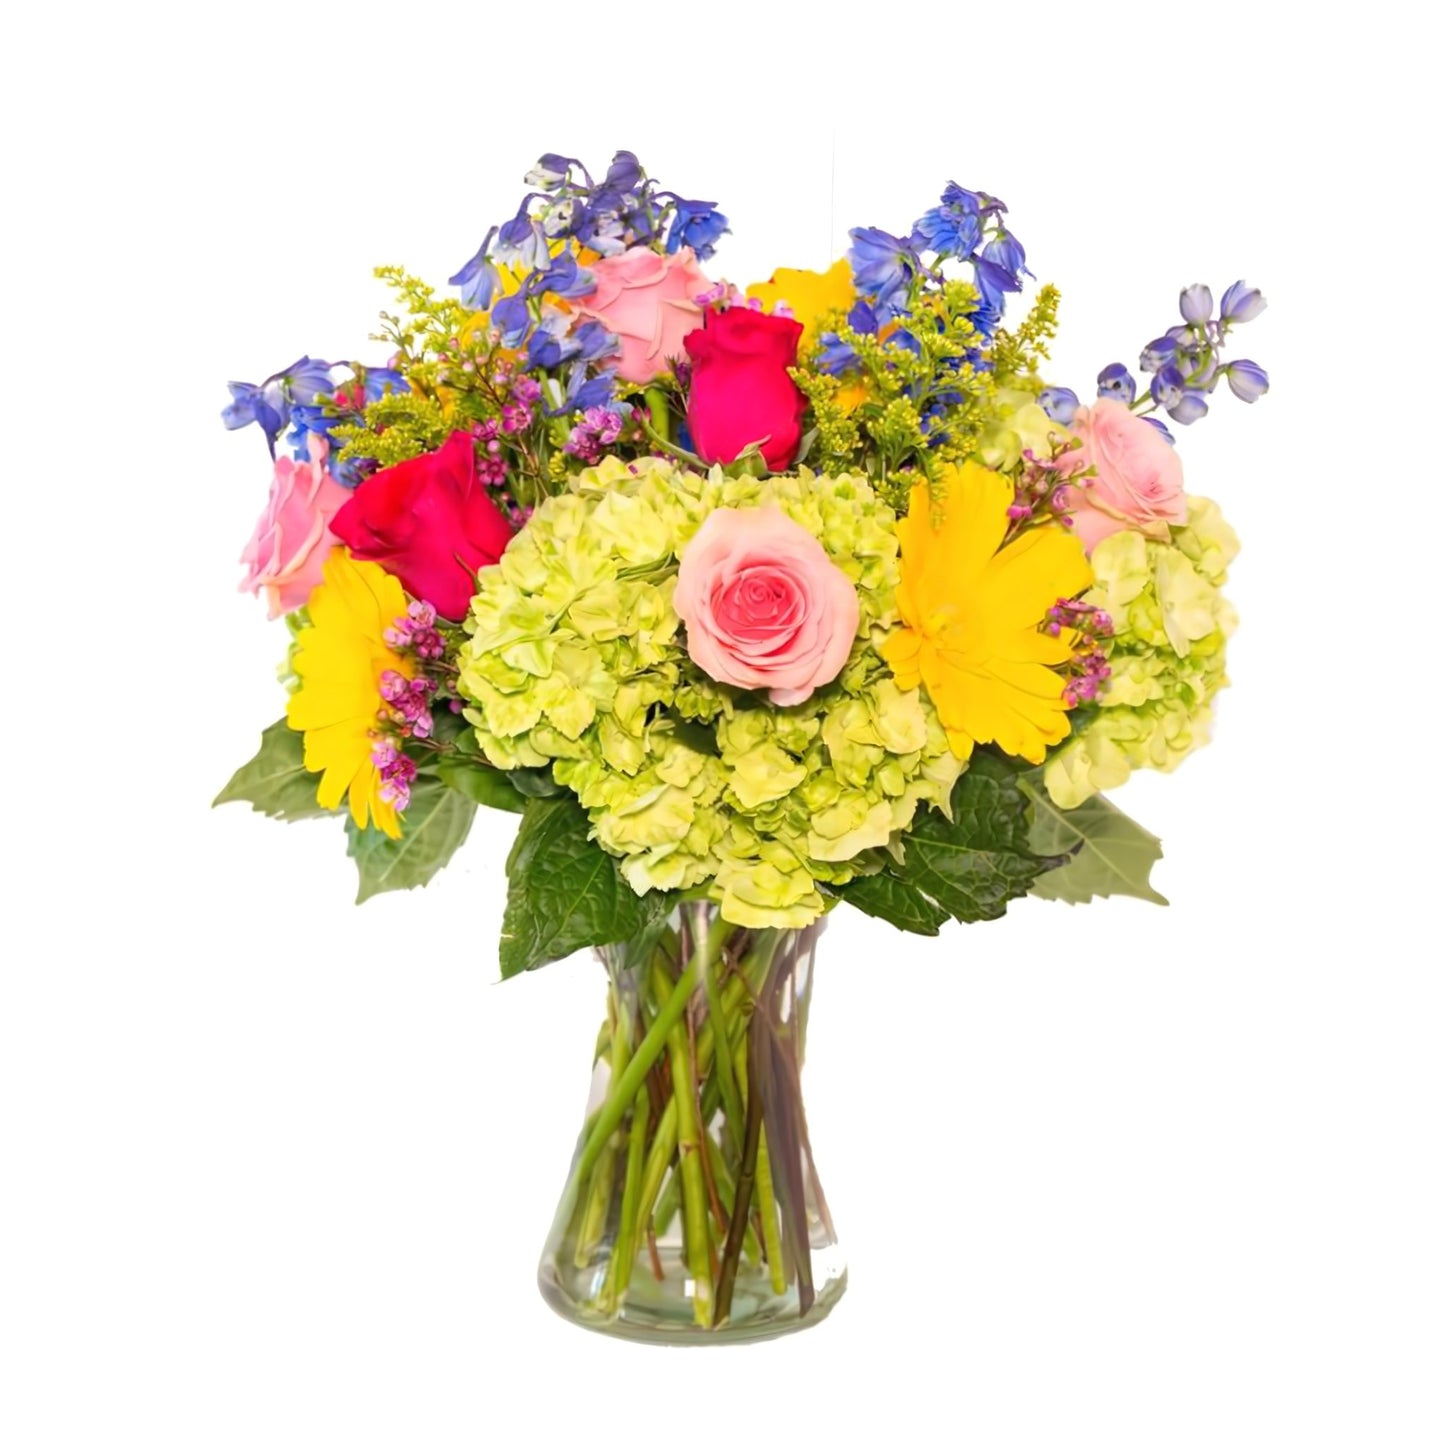 French Country Garden Bouquet - Floral Arrangement - Flower Delivery Brooklyn